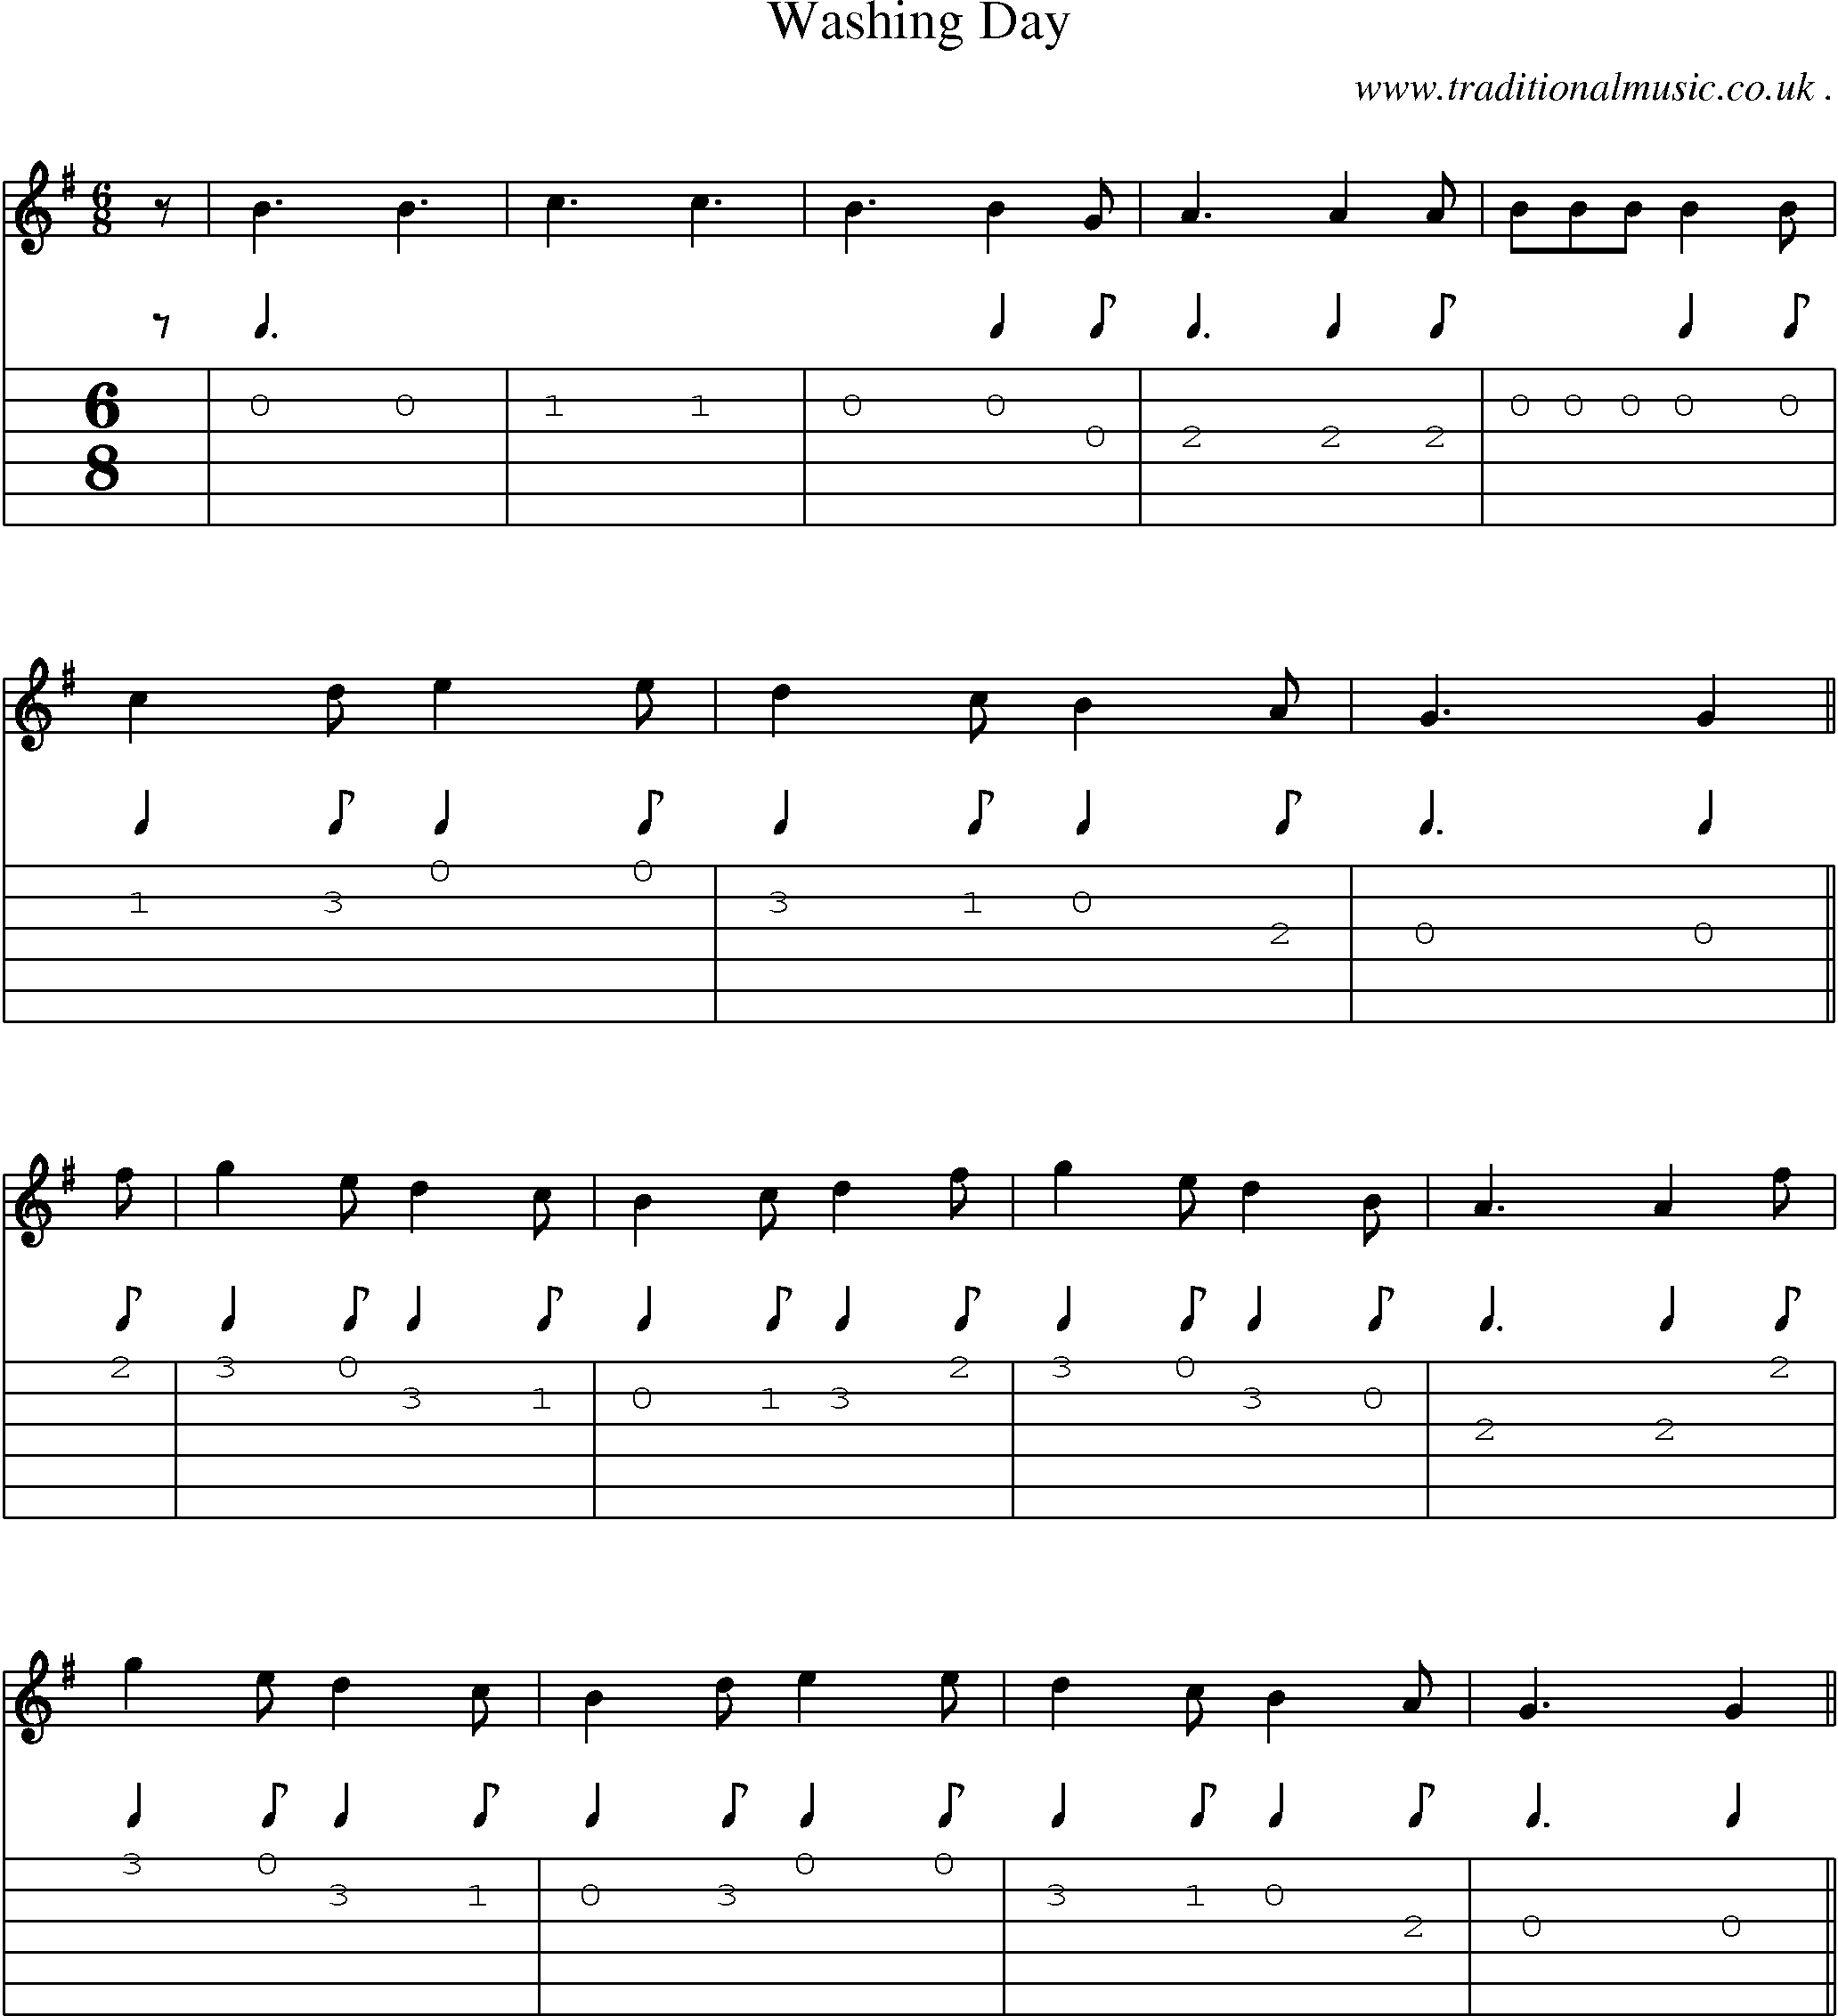 Sheet-Music and Guitar Tabs for Washing Day